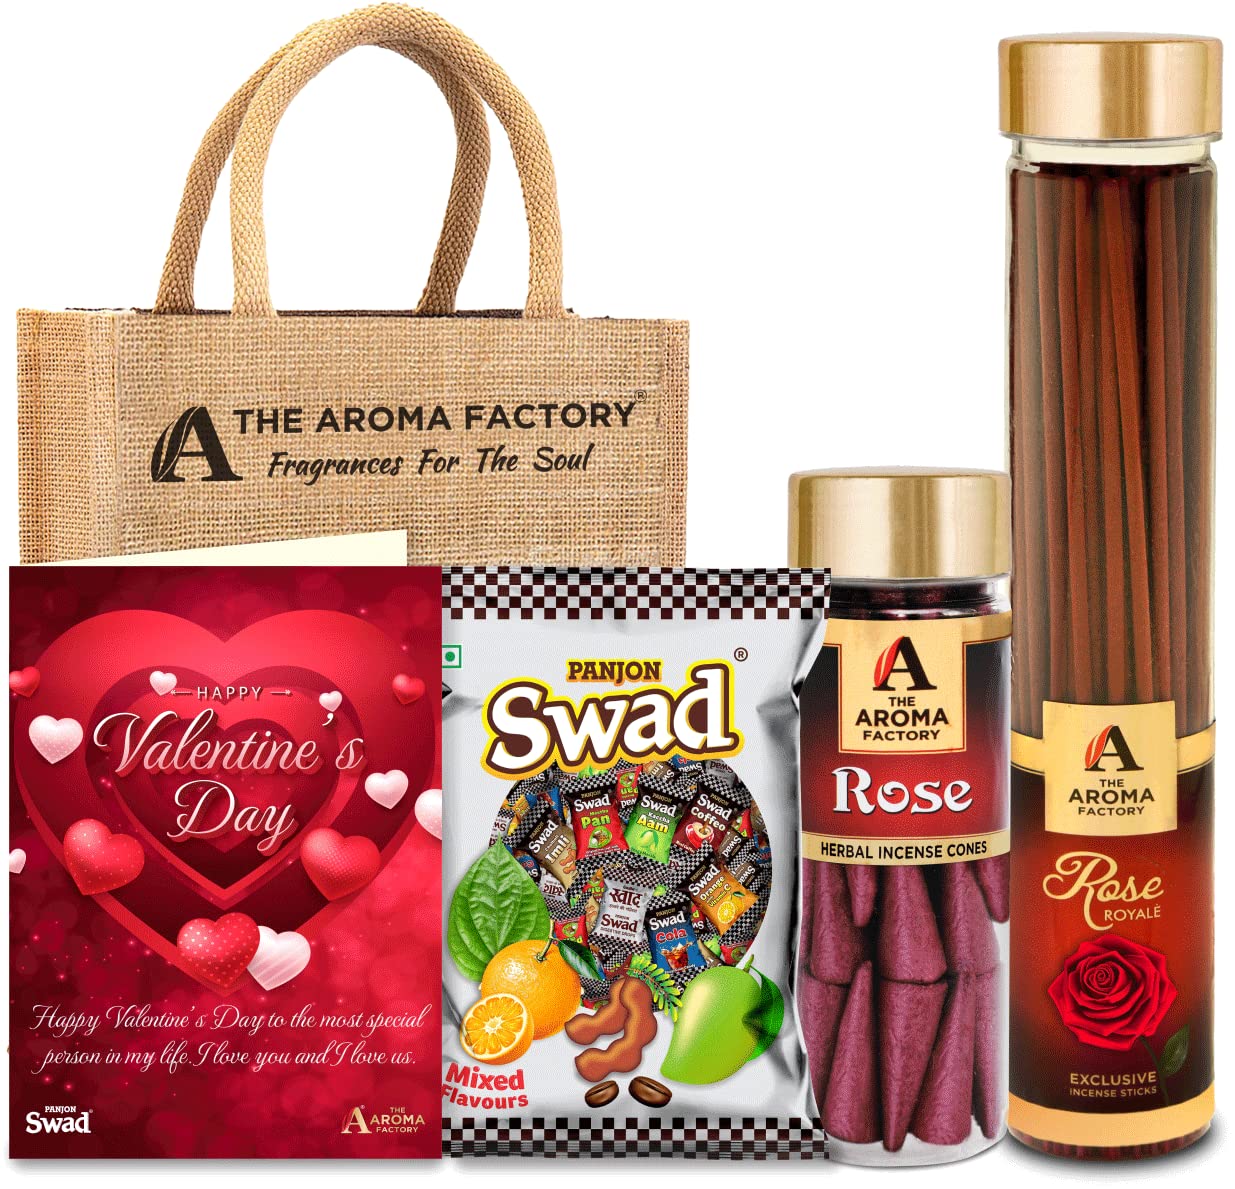 The Aroma Factory Happy Valentine's Day Gift Hamper Set (Swad Mix 25 Candy, Incense Rose Agarbatti, Rose Dhoopcone, Greeting Card, Jute Bag) Gift Item for Your Valentine